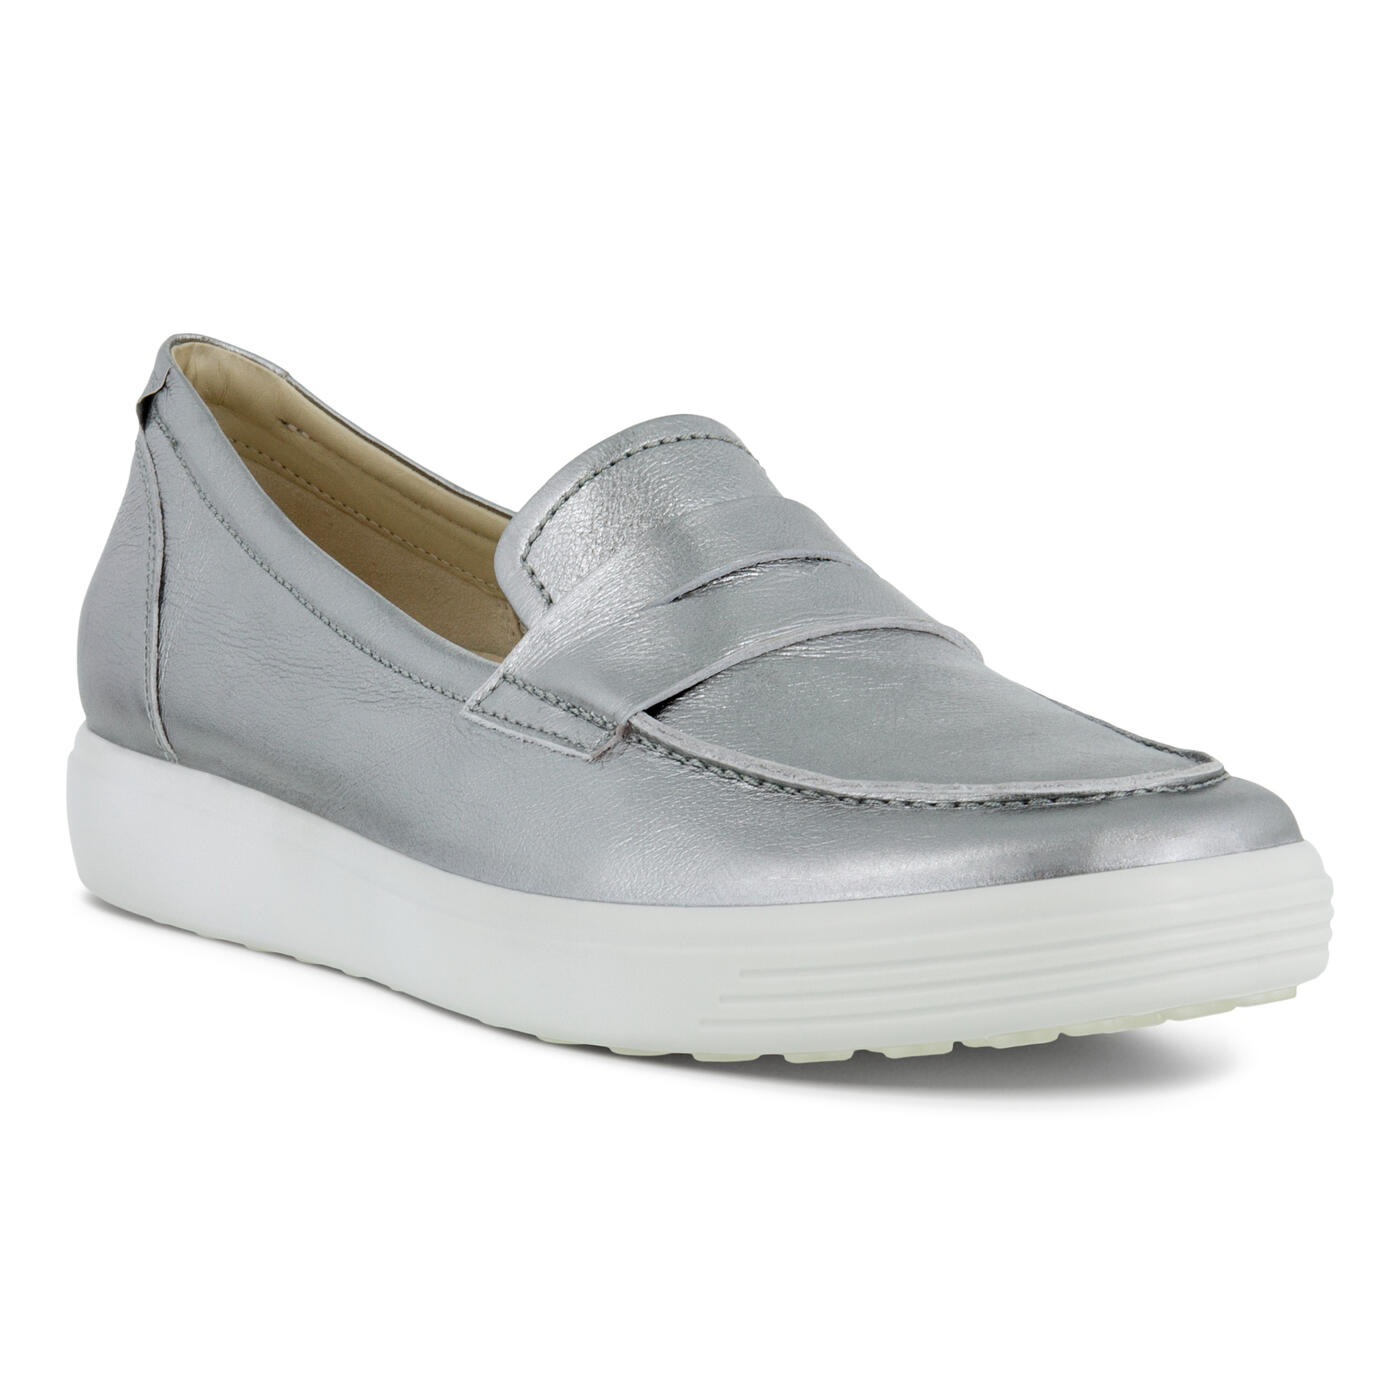 Women's Soft 7 Loafers | Official Store | ECCO® Shoes | Canada